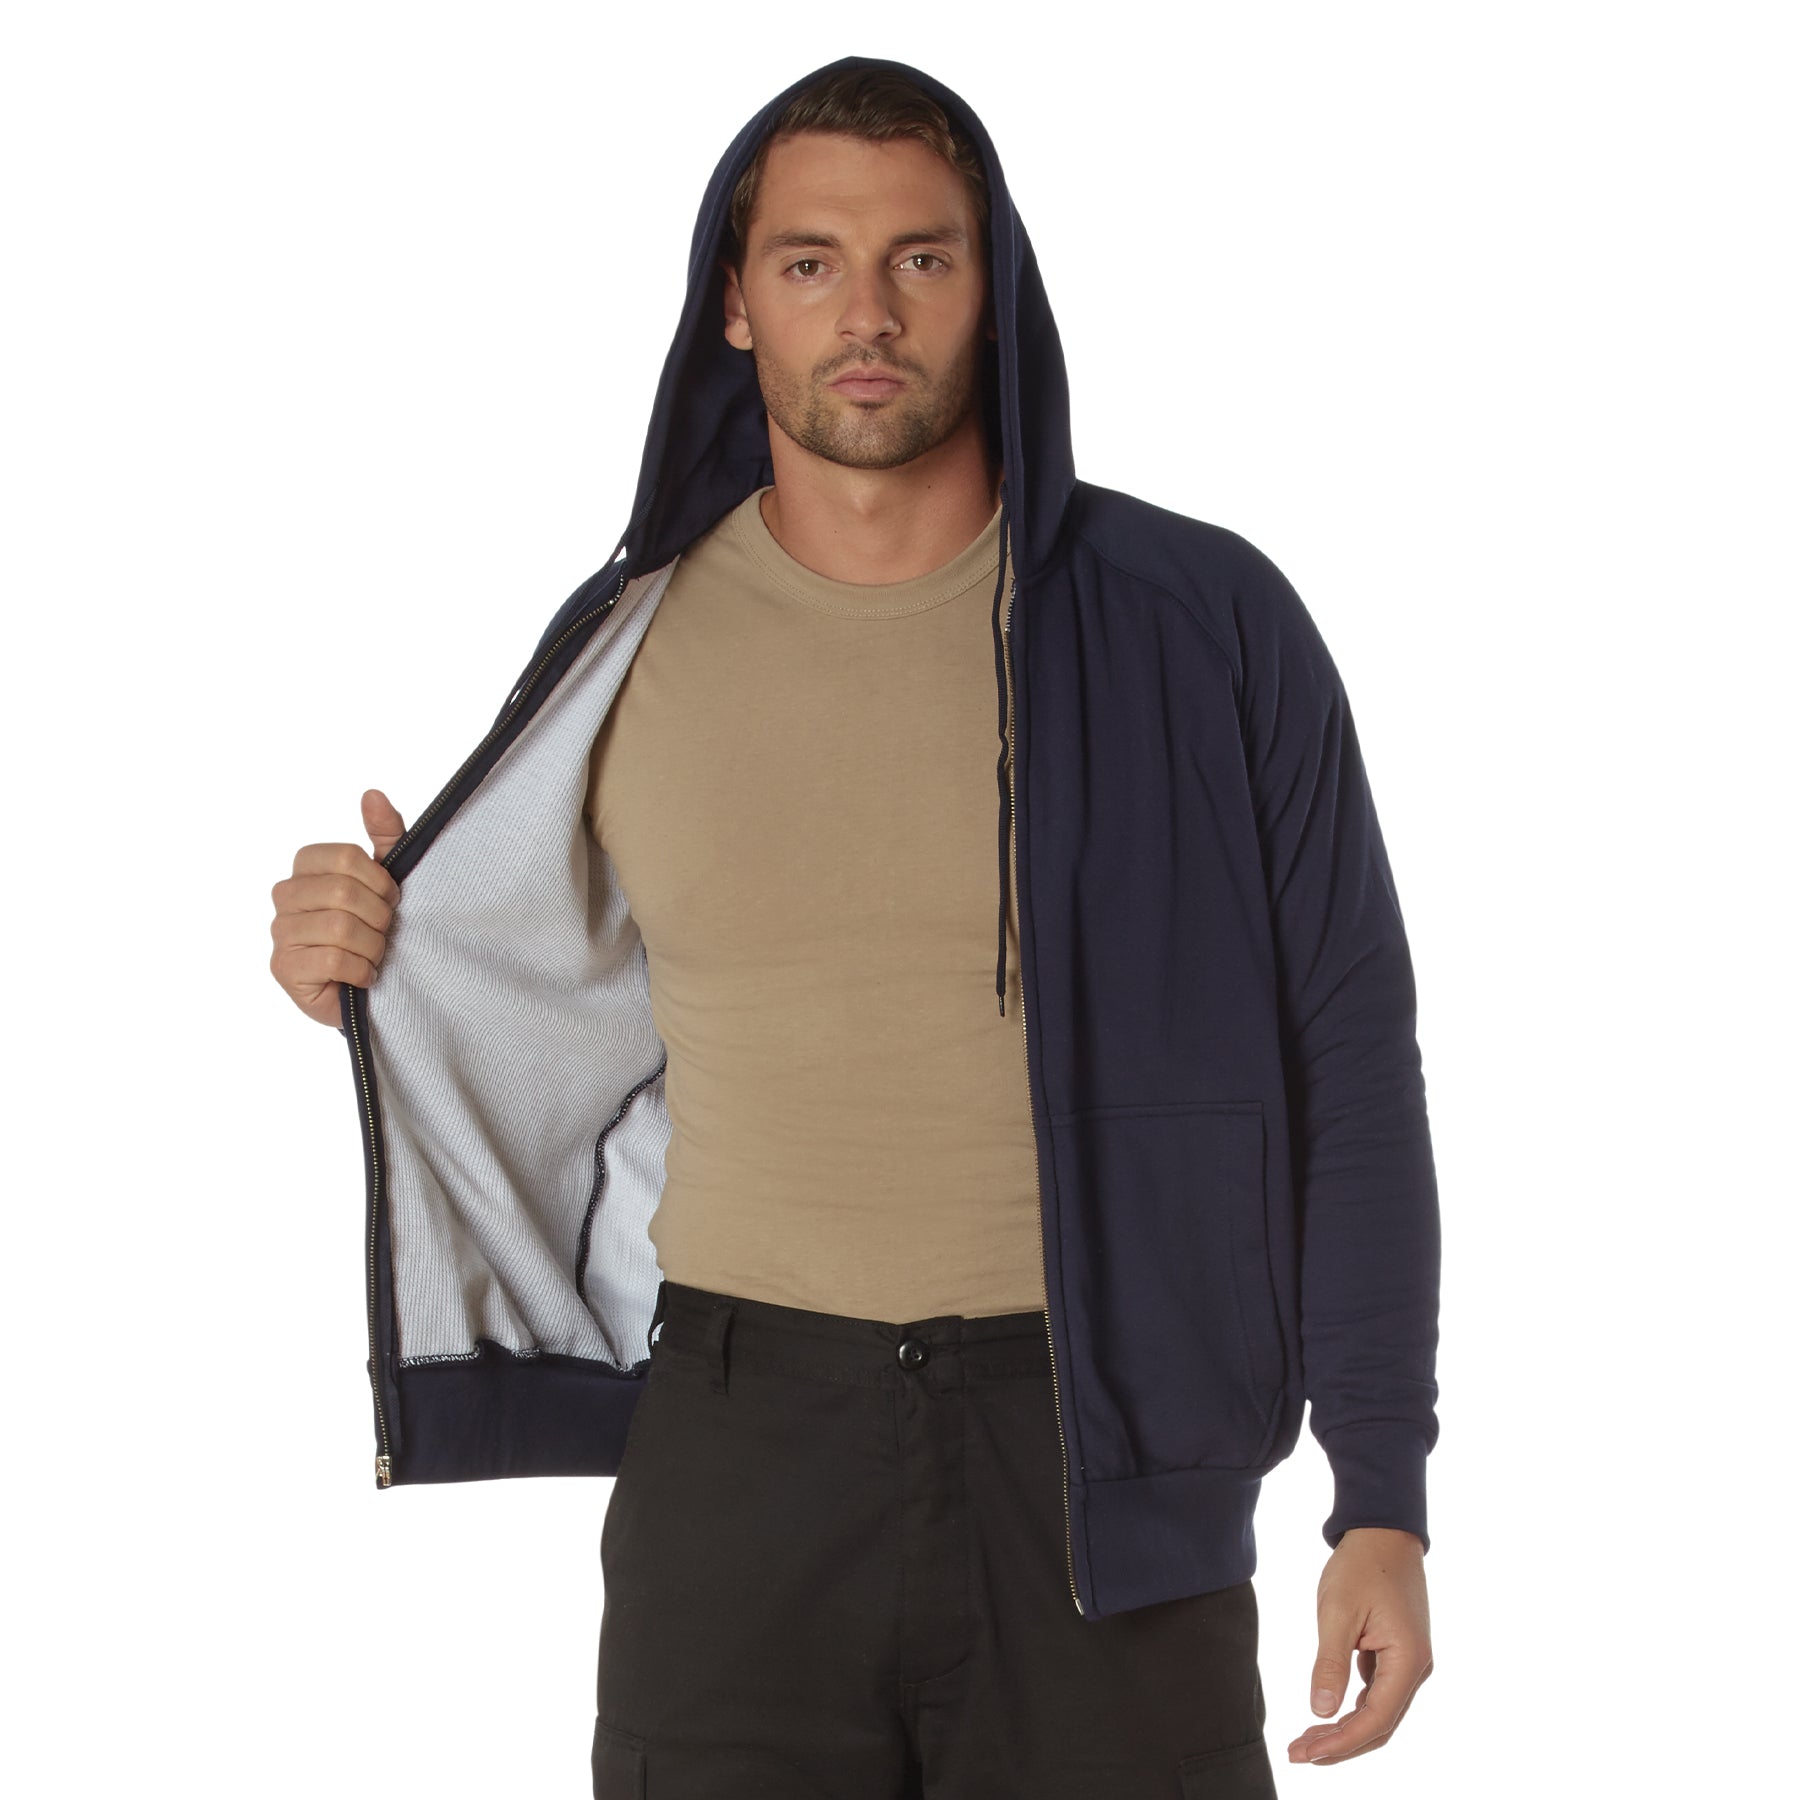 Poly/Cotton Thermal-Lined Zipper Hooded Sweatshirts